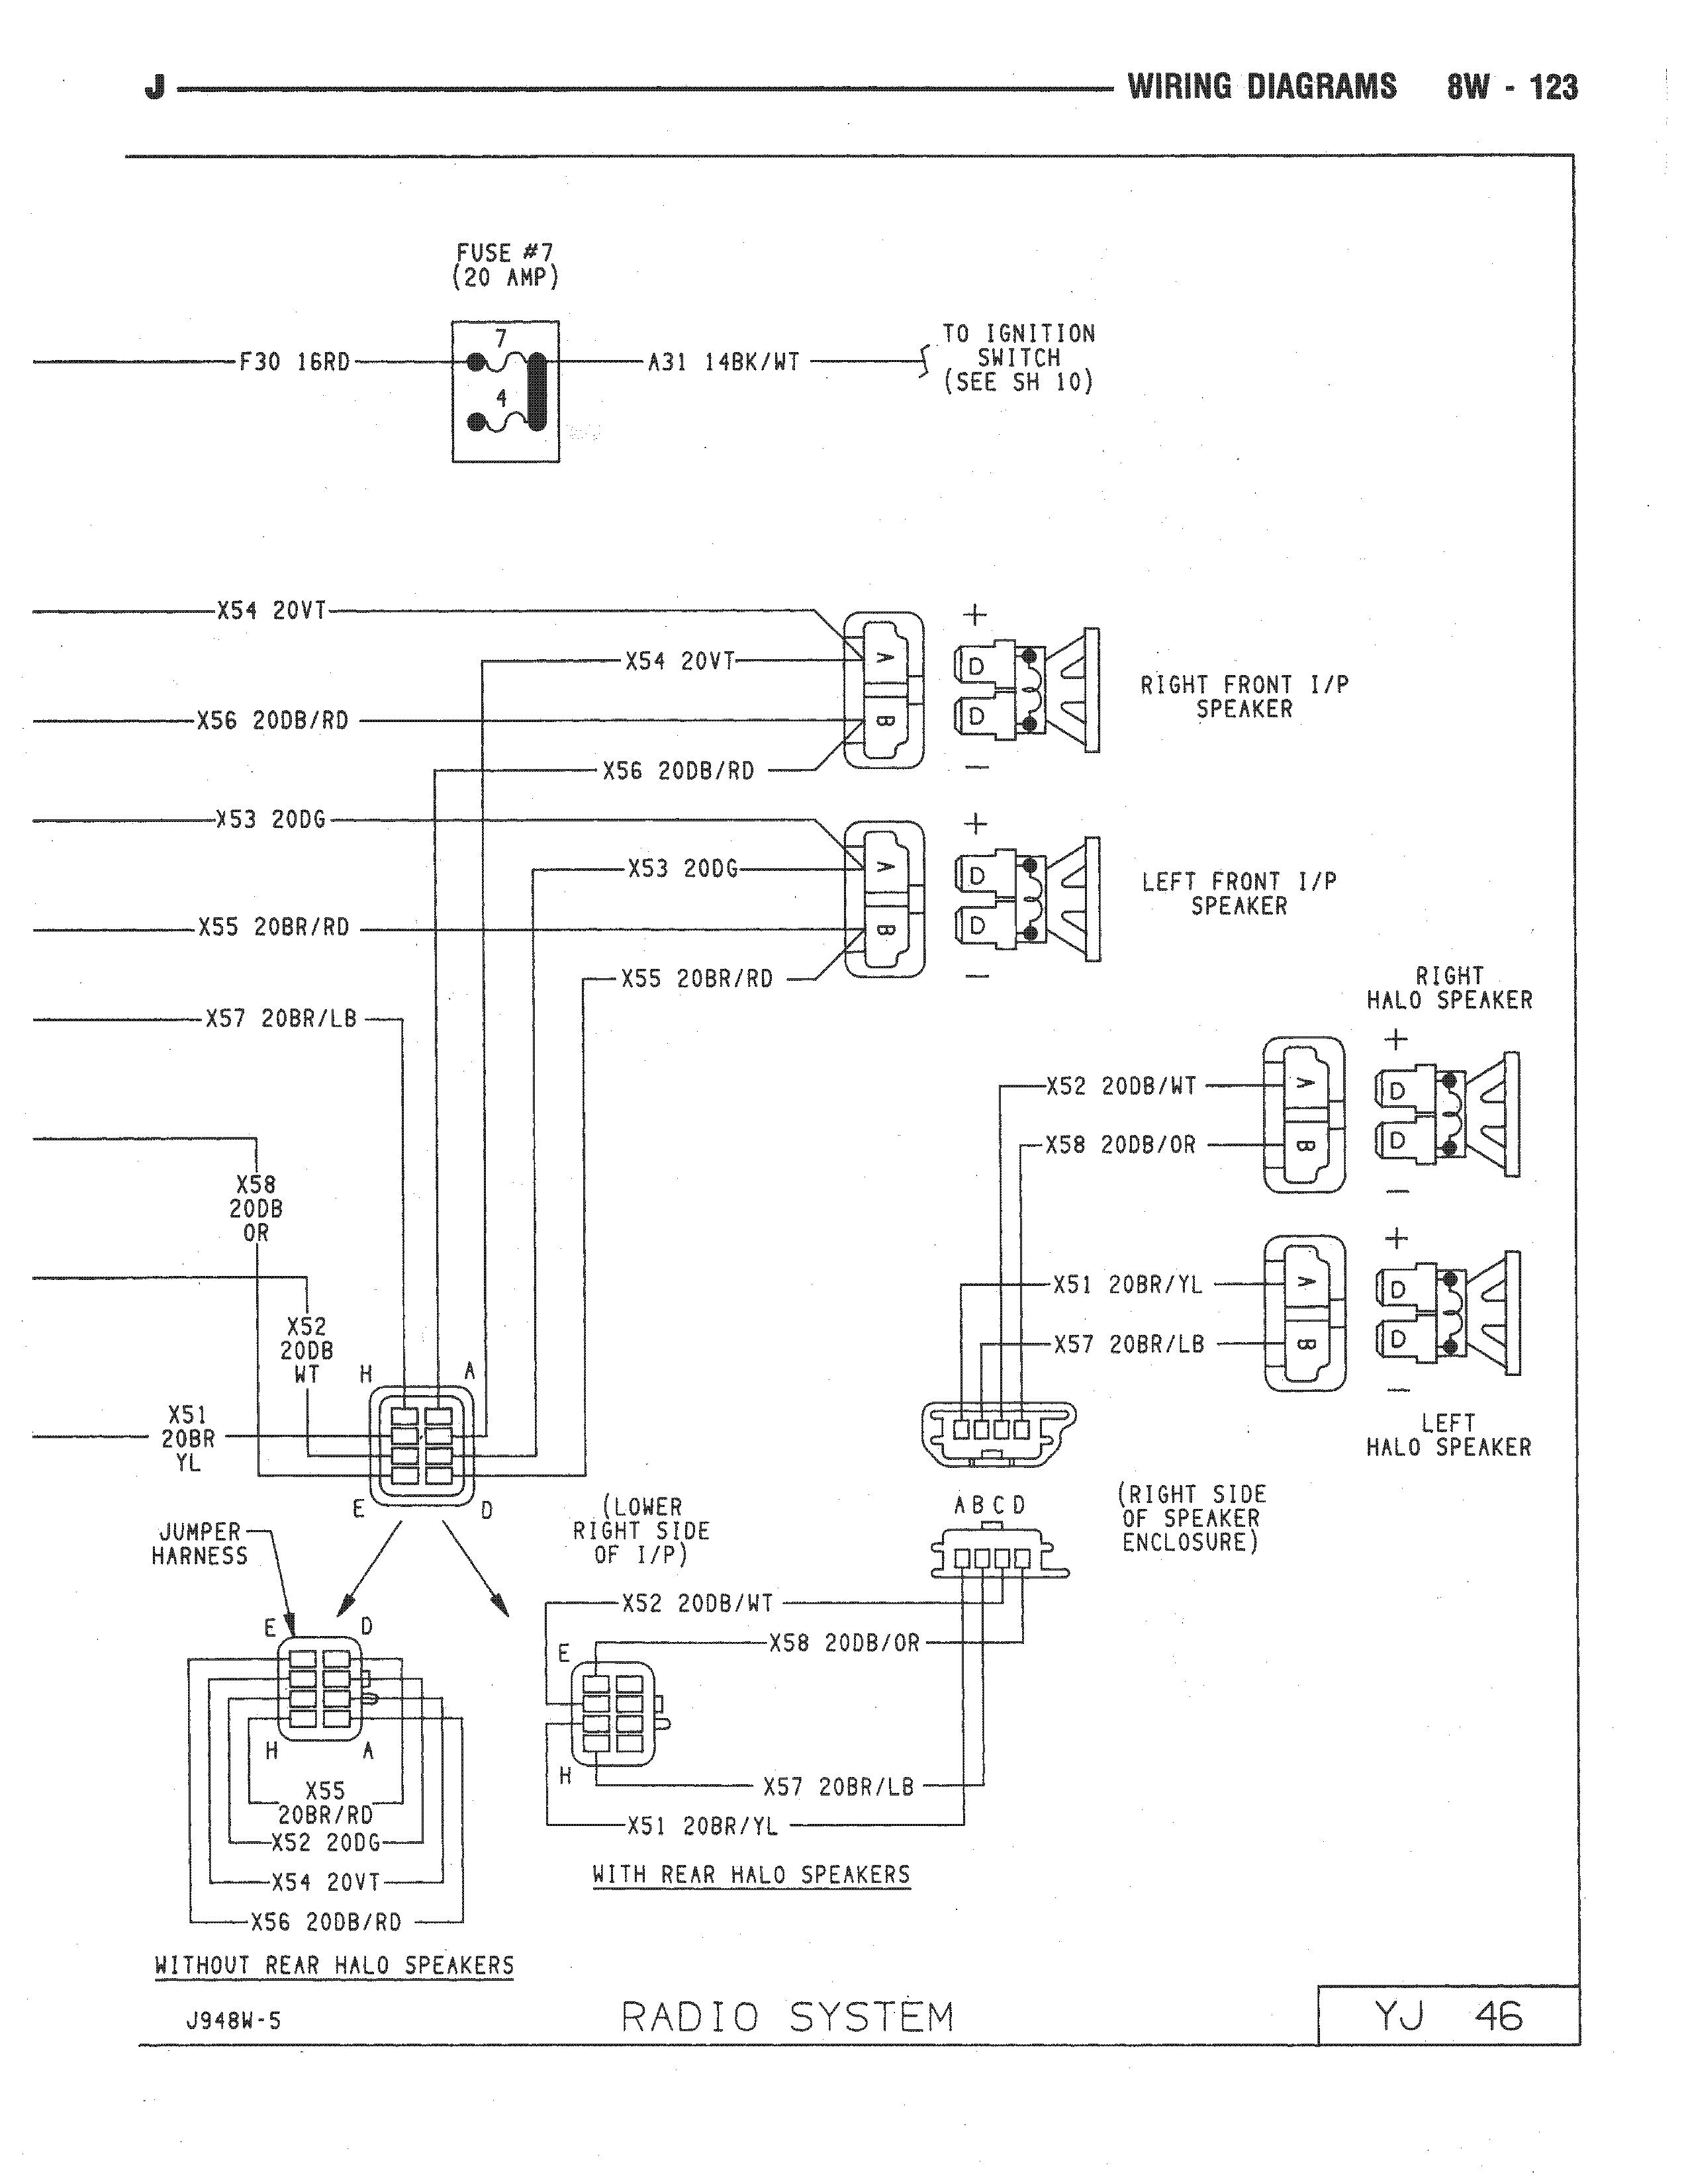 jeep trailer wiring harness diagram data schematic diagram mix 2014 wrangler trailer harness wiring diagrams show